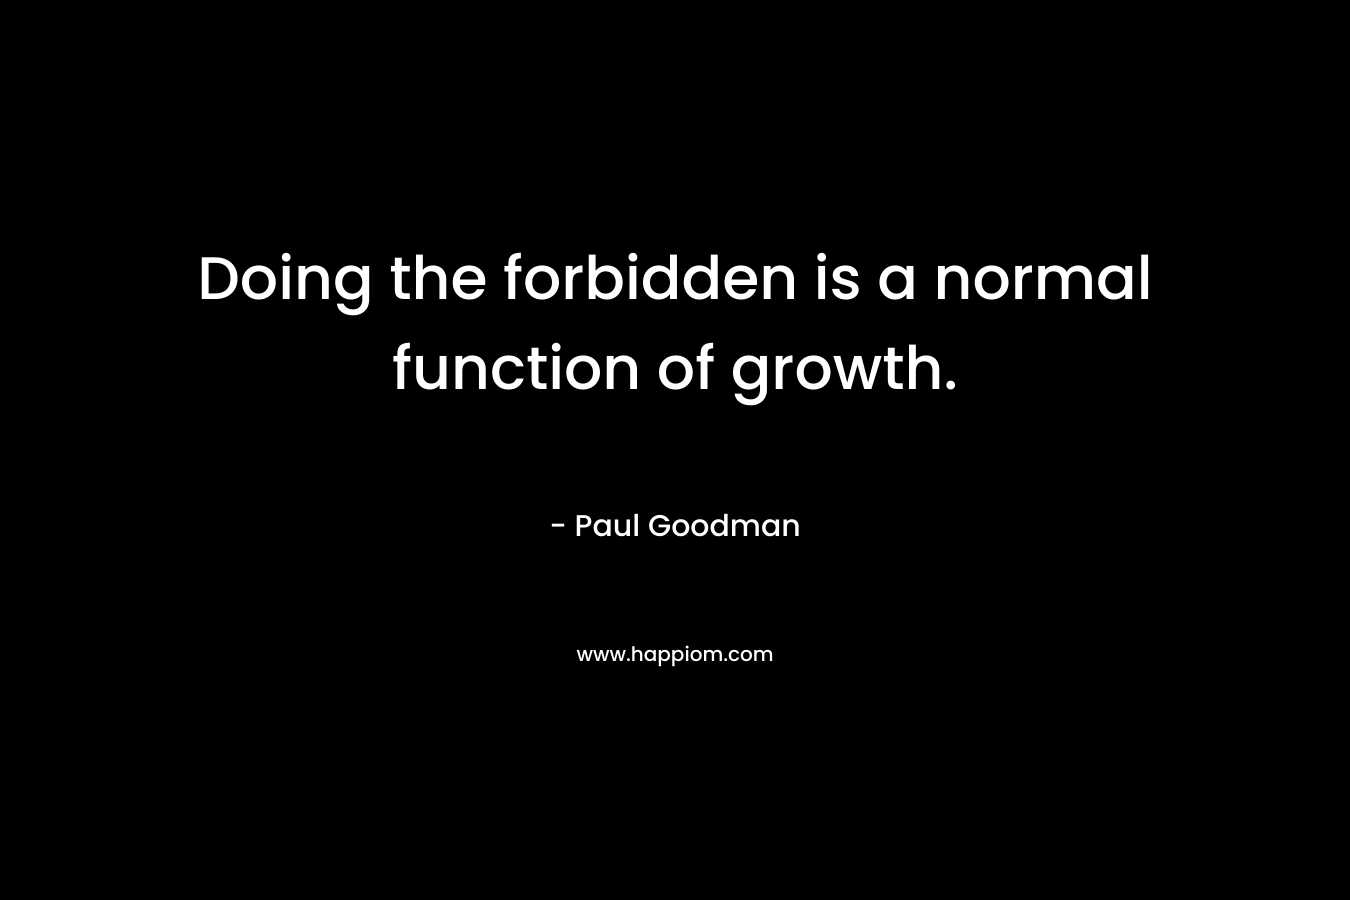 Doing the forbidden is a normal function of growth. – Paul Goodman